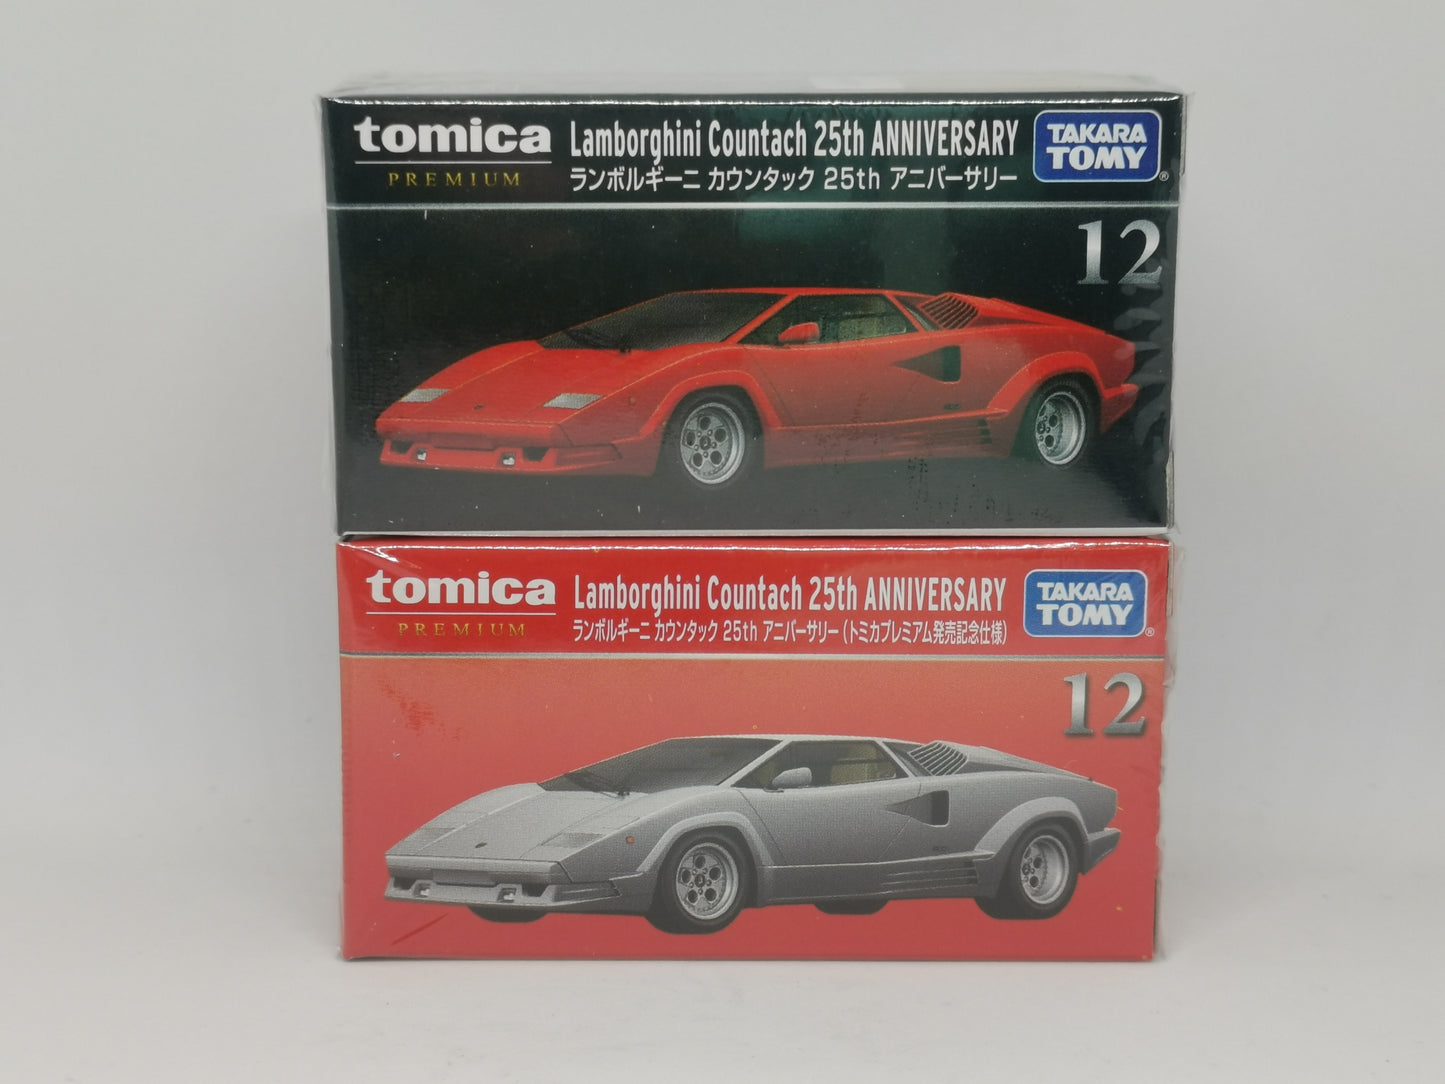 Tomica Premium No.12 Countach 25th Anniversary set of two